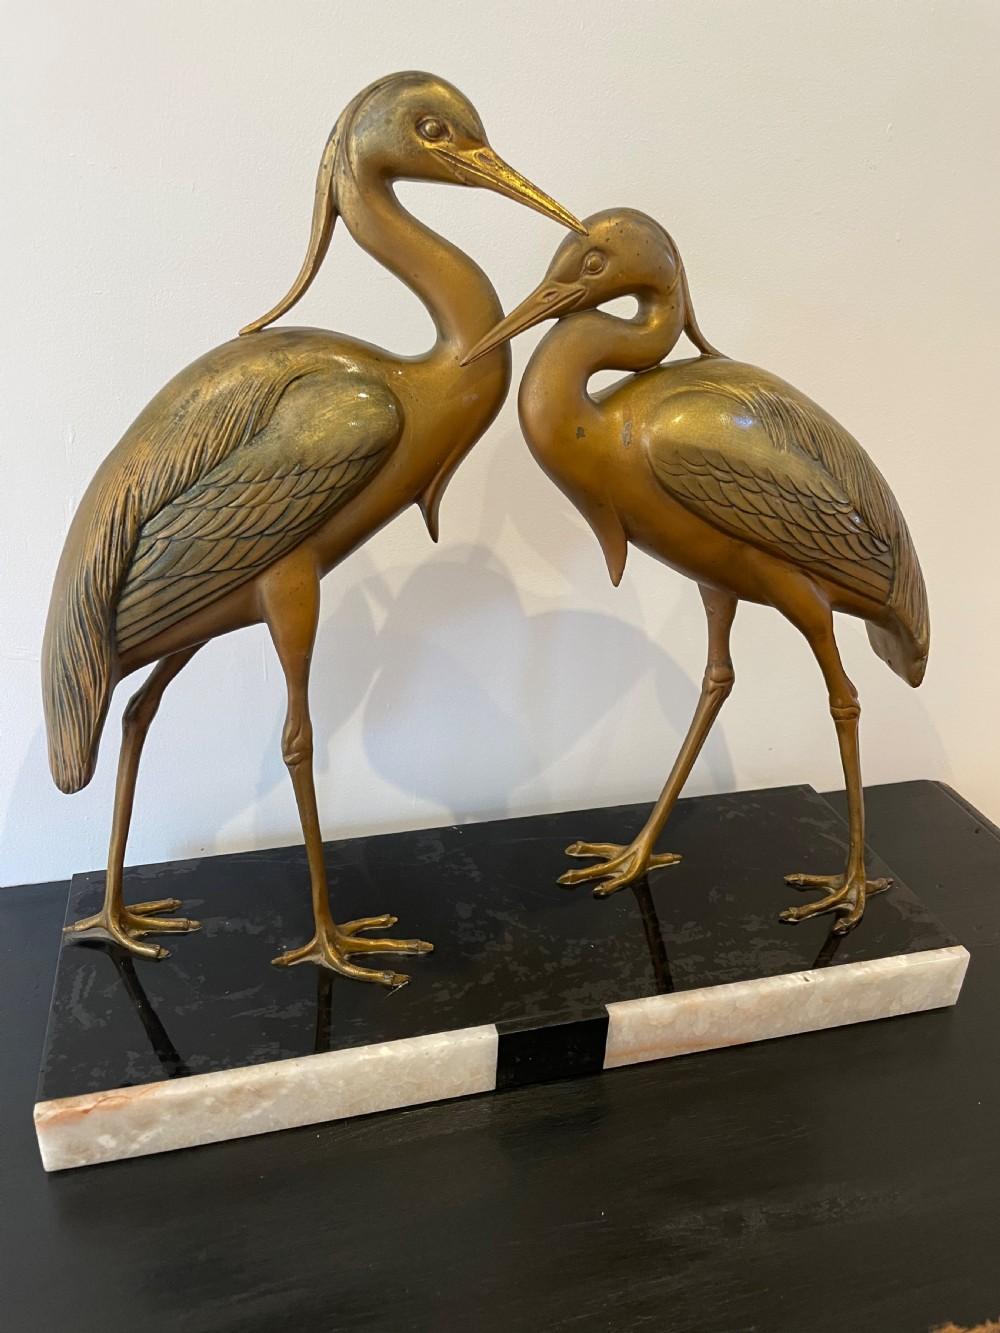 Great French Art Deco spelter sculpture
Of two Herons or Cranes mounted on a marble base
Circa 1930’s
Height 19 inches or 48 cms
Width 19.5 Inches or 49.5 cms
Depth 7 inches 18 cms